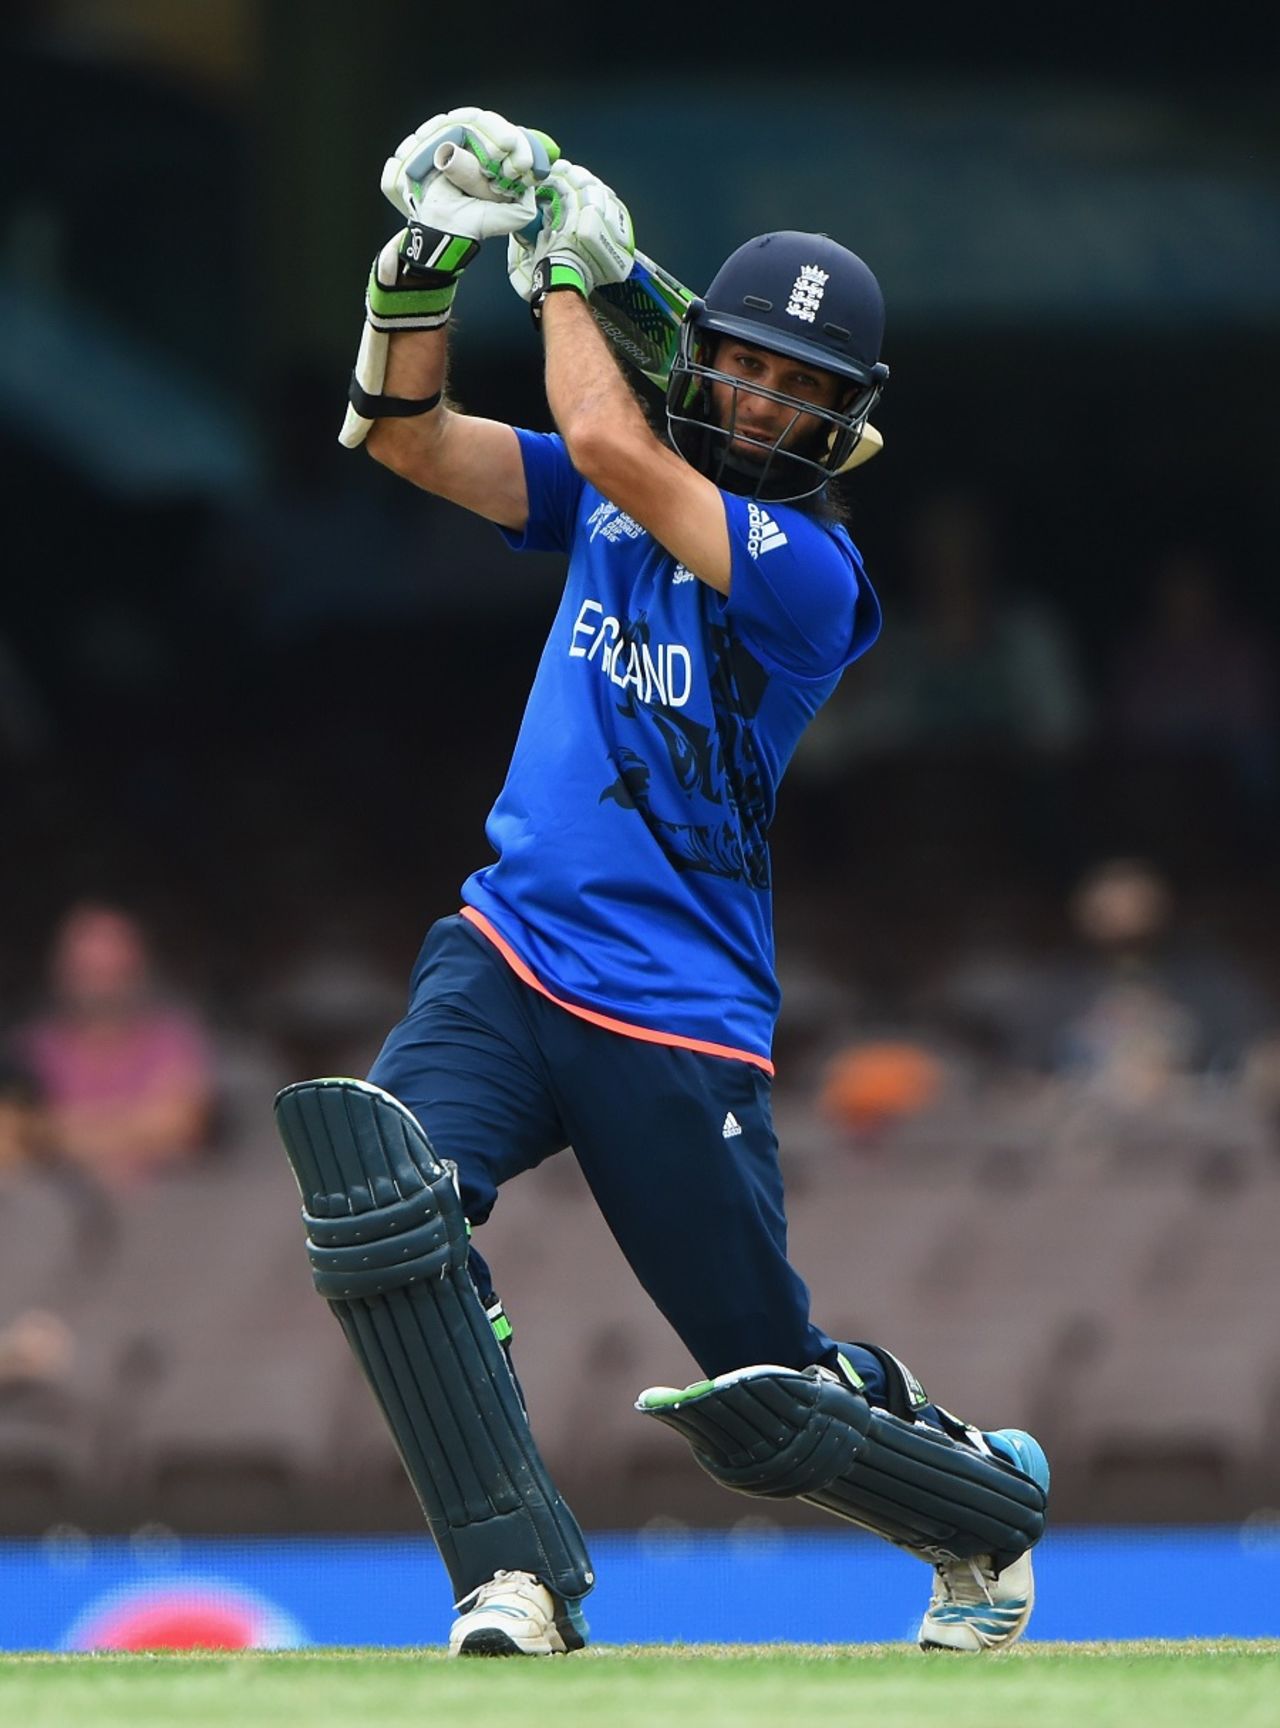 Moeen Ali drives one through the off side, England v West Indies, World Cup warm-up match, Sydney, February 9, 2015